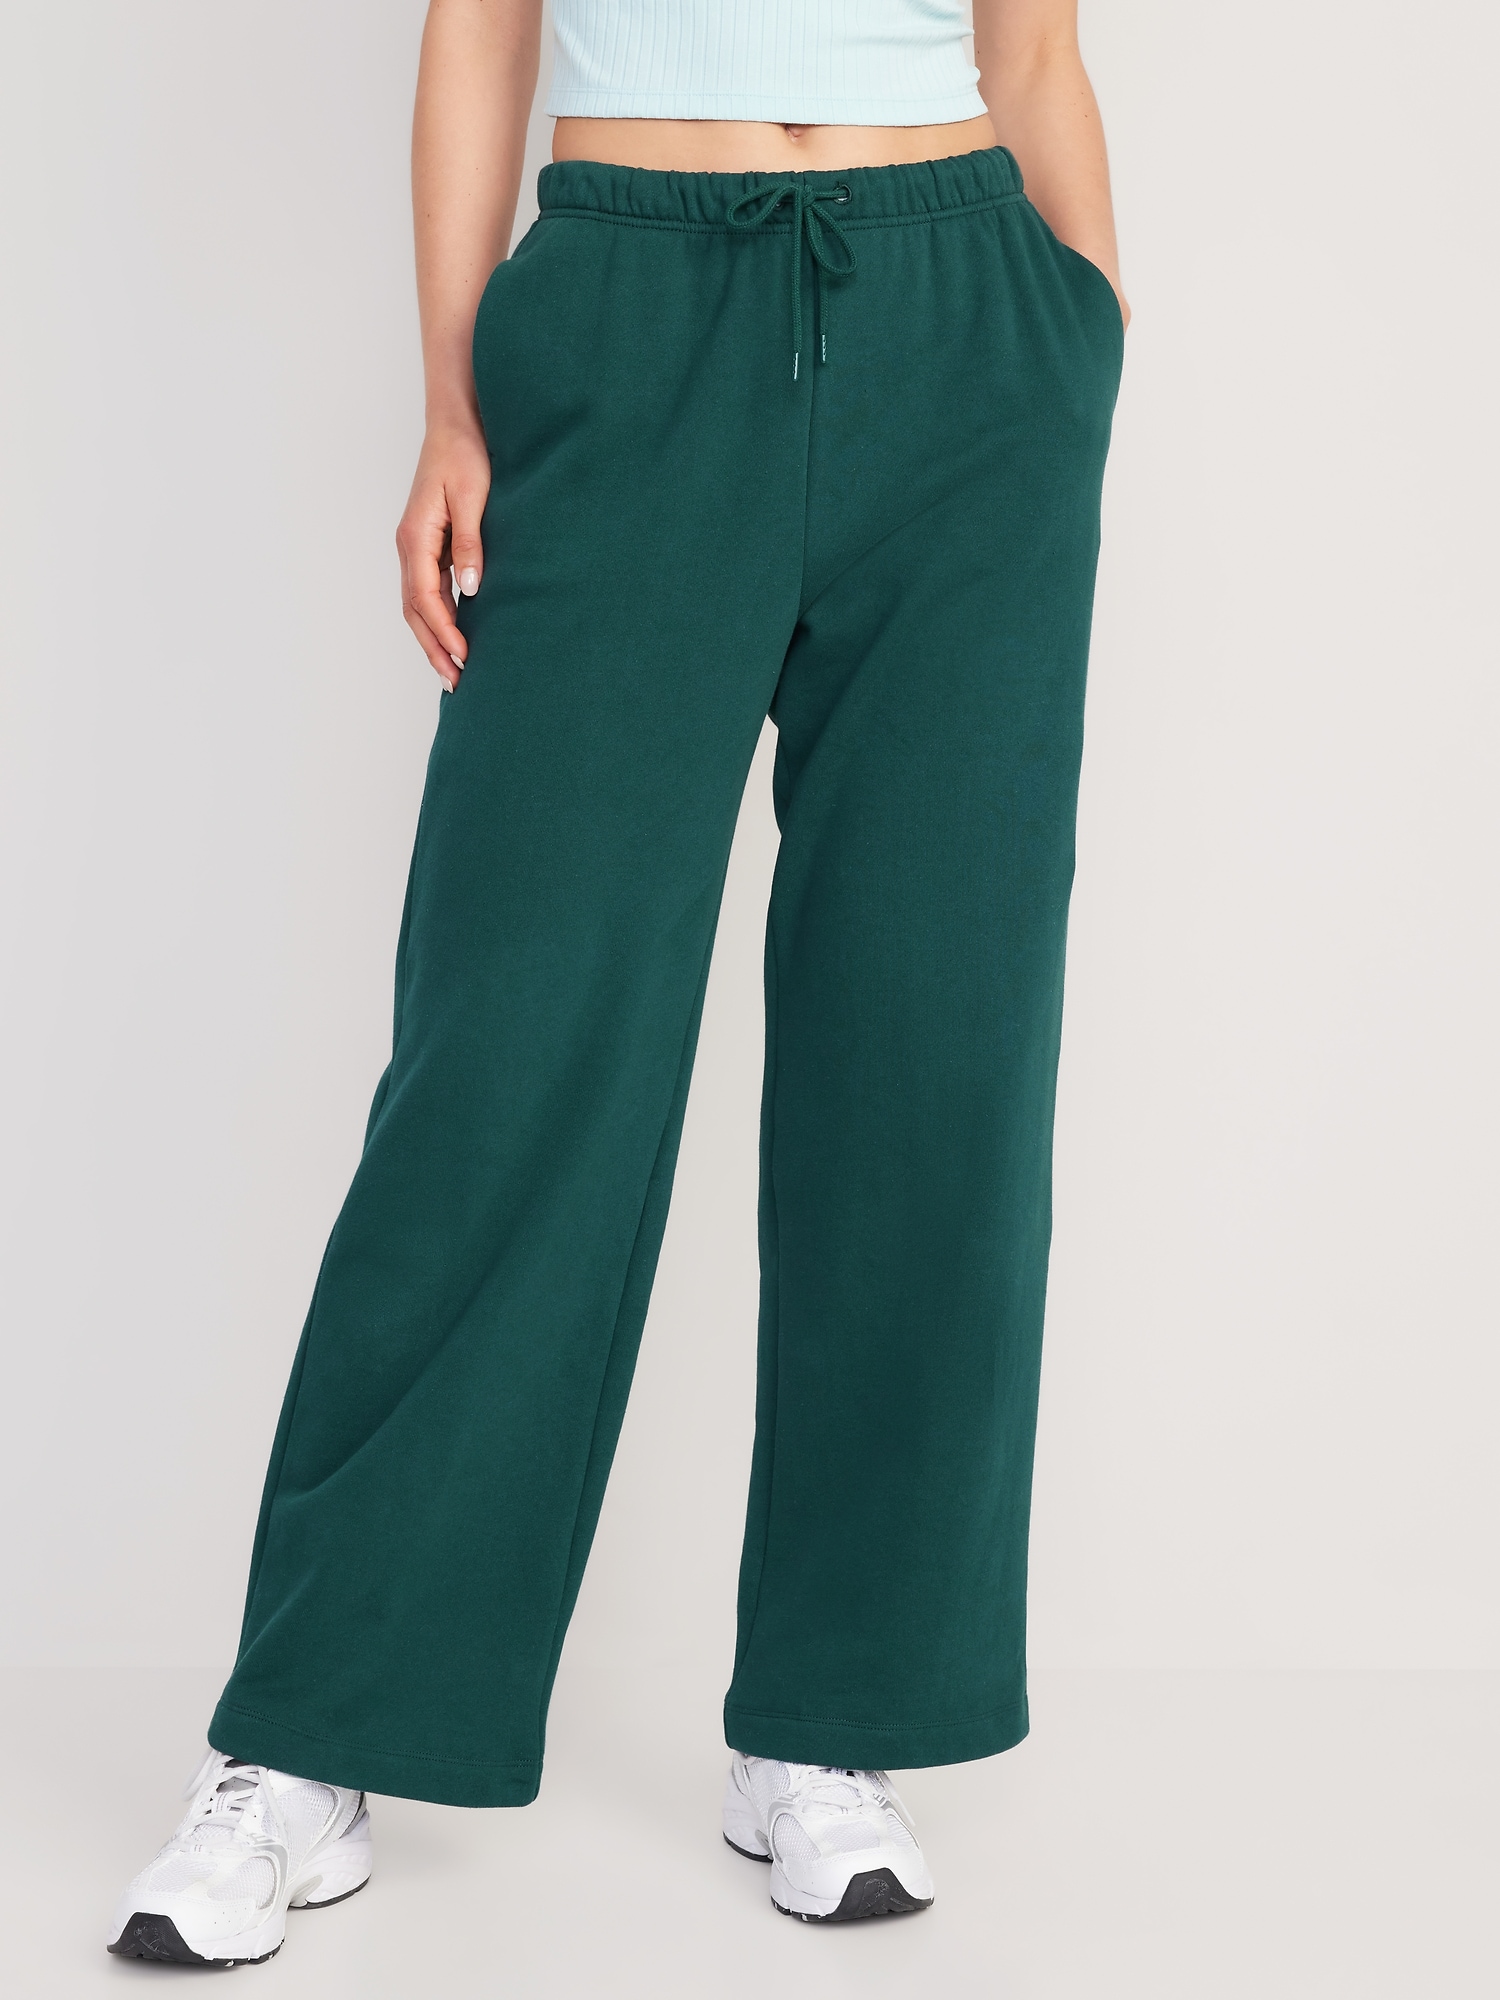 Old Navy Extra High-Waisted Vintage Straight Lounge Sweatpants for Women green. 1